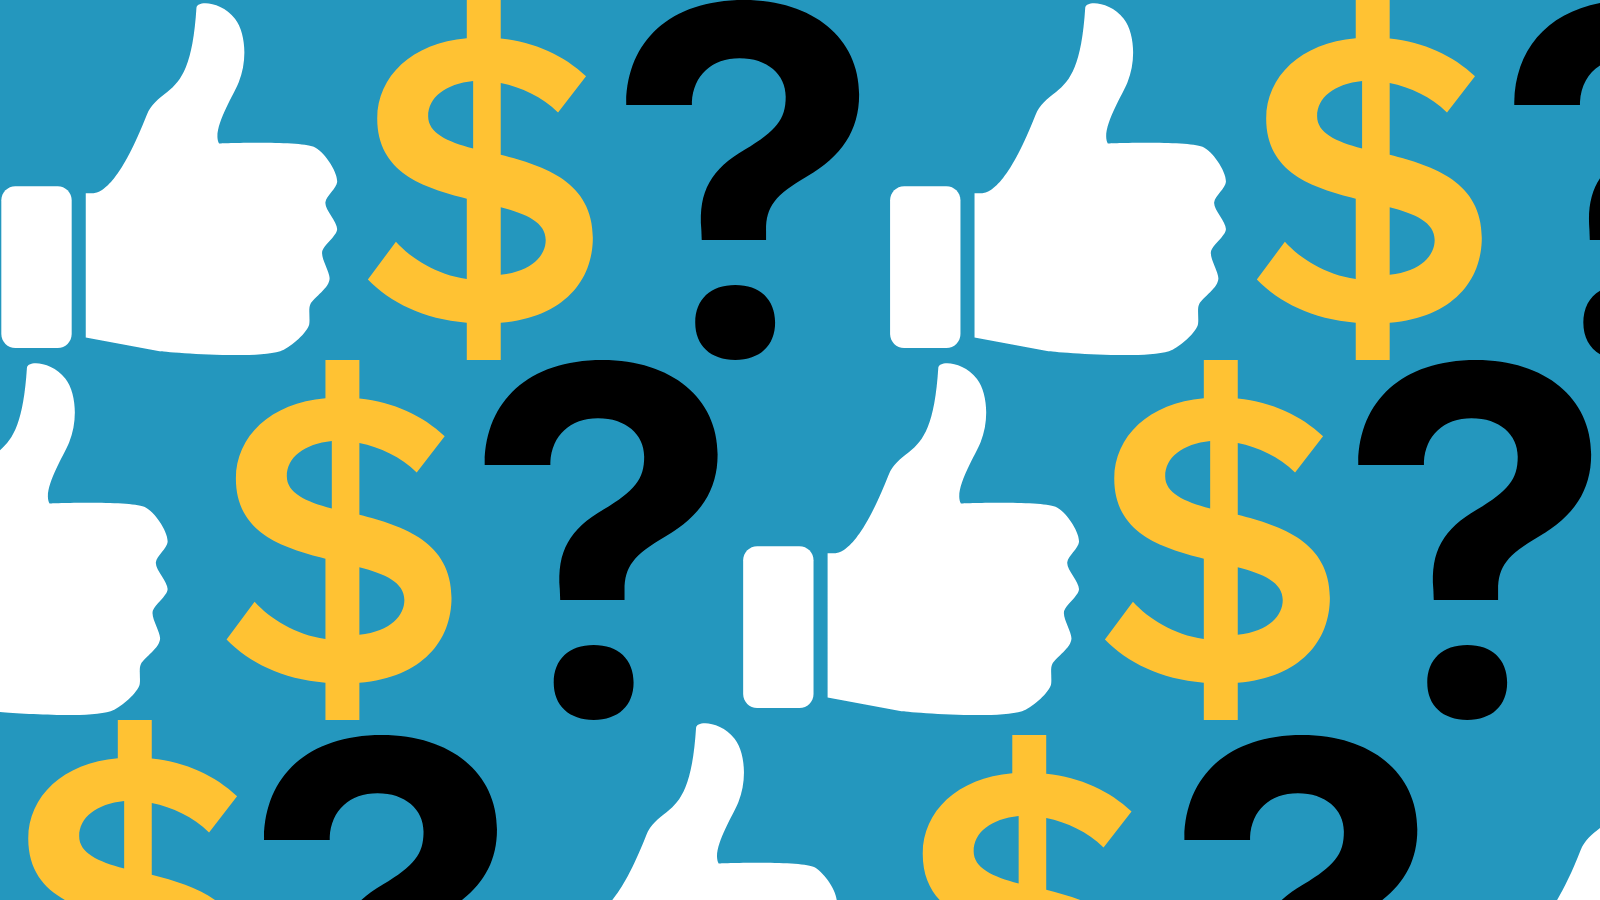 A thumbs up symbol, a dollar sign, and a question mark in a repeating pattern